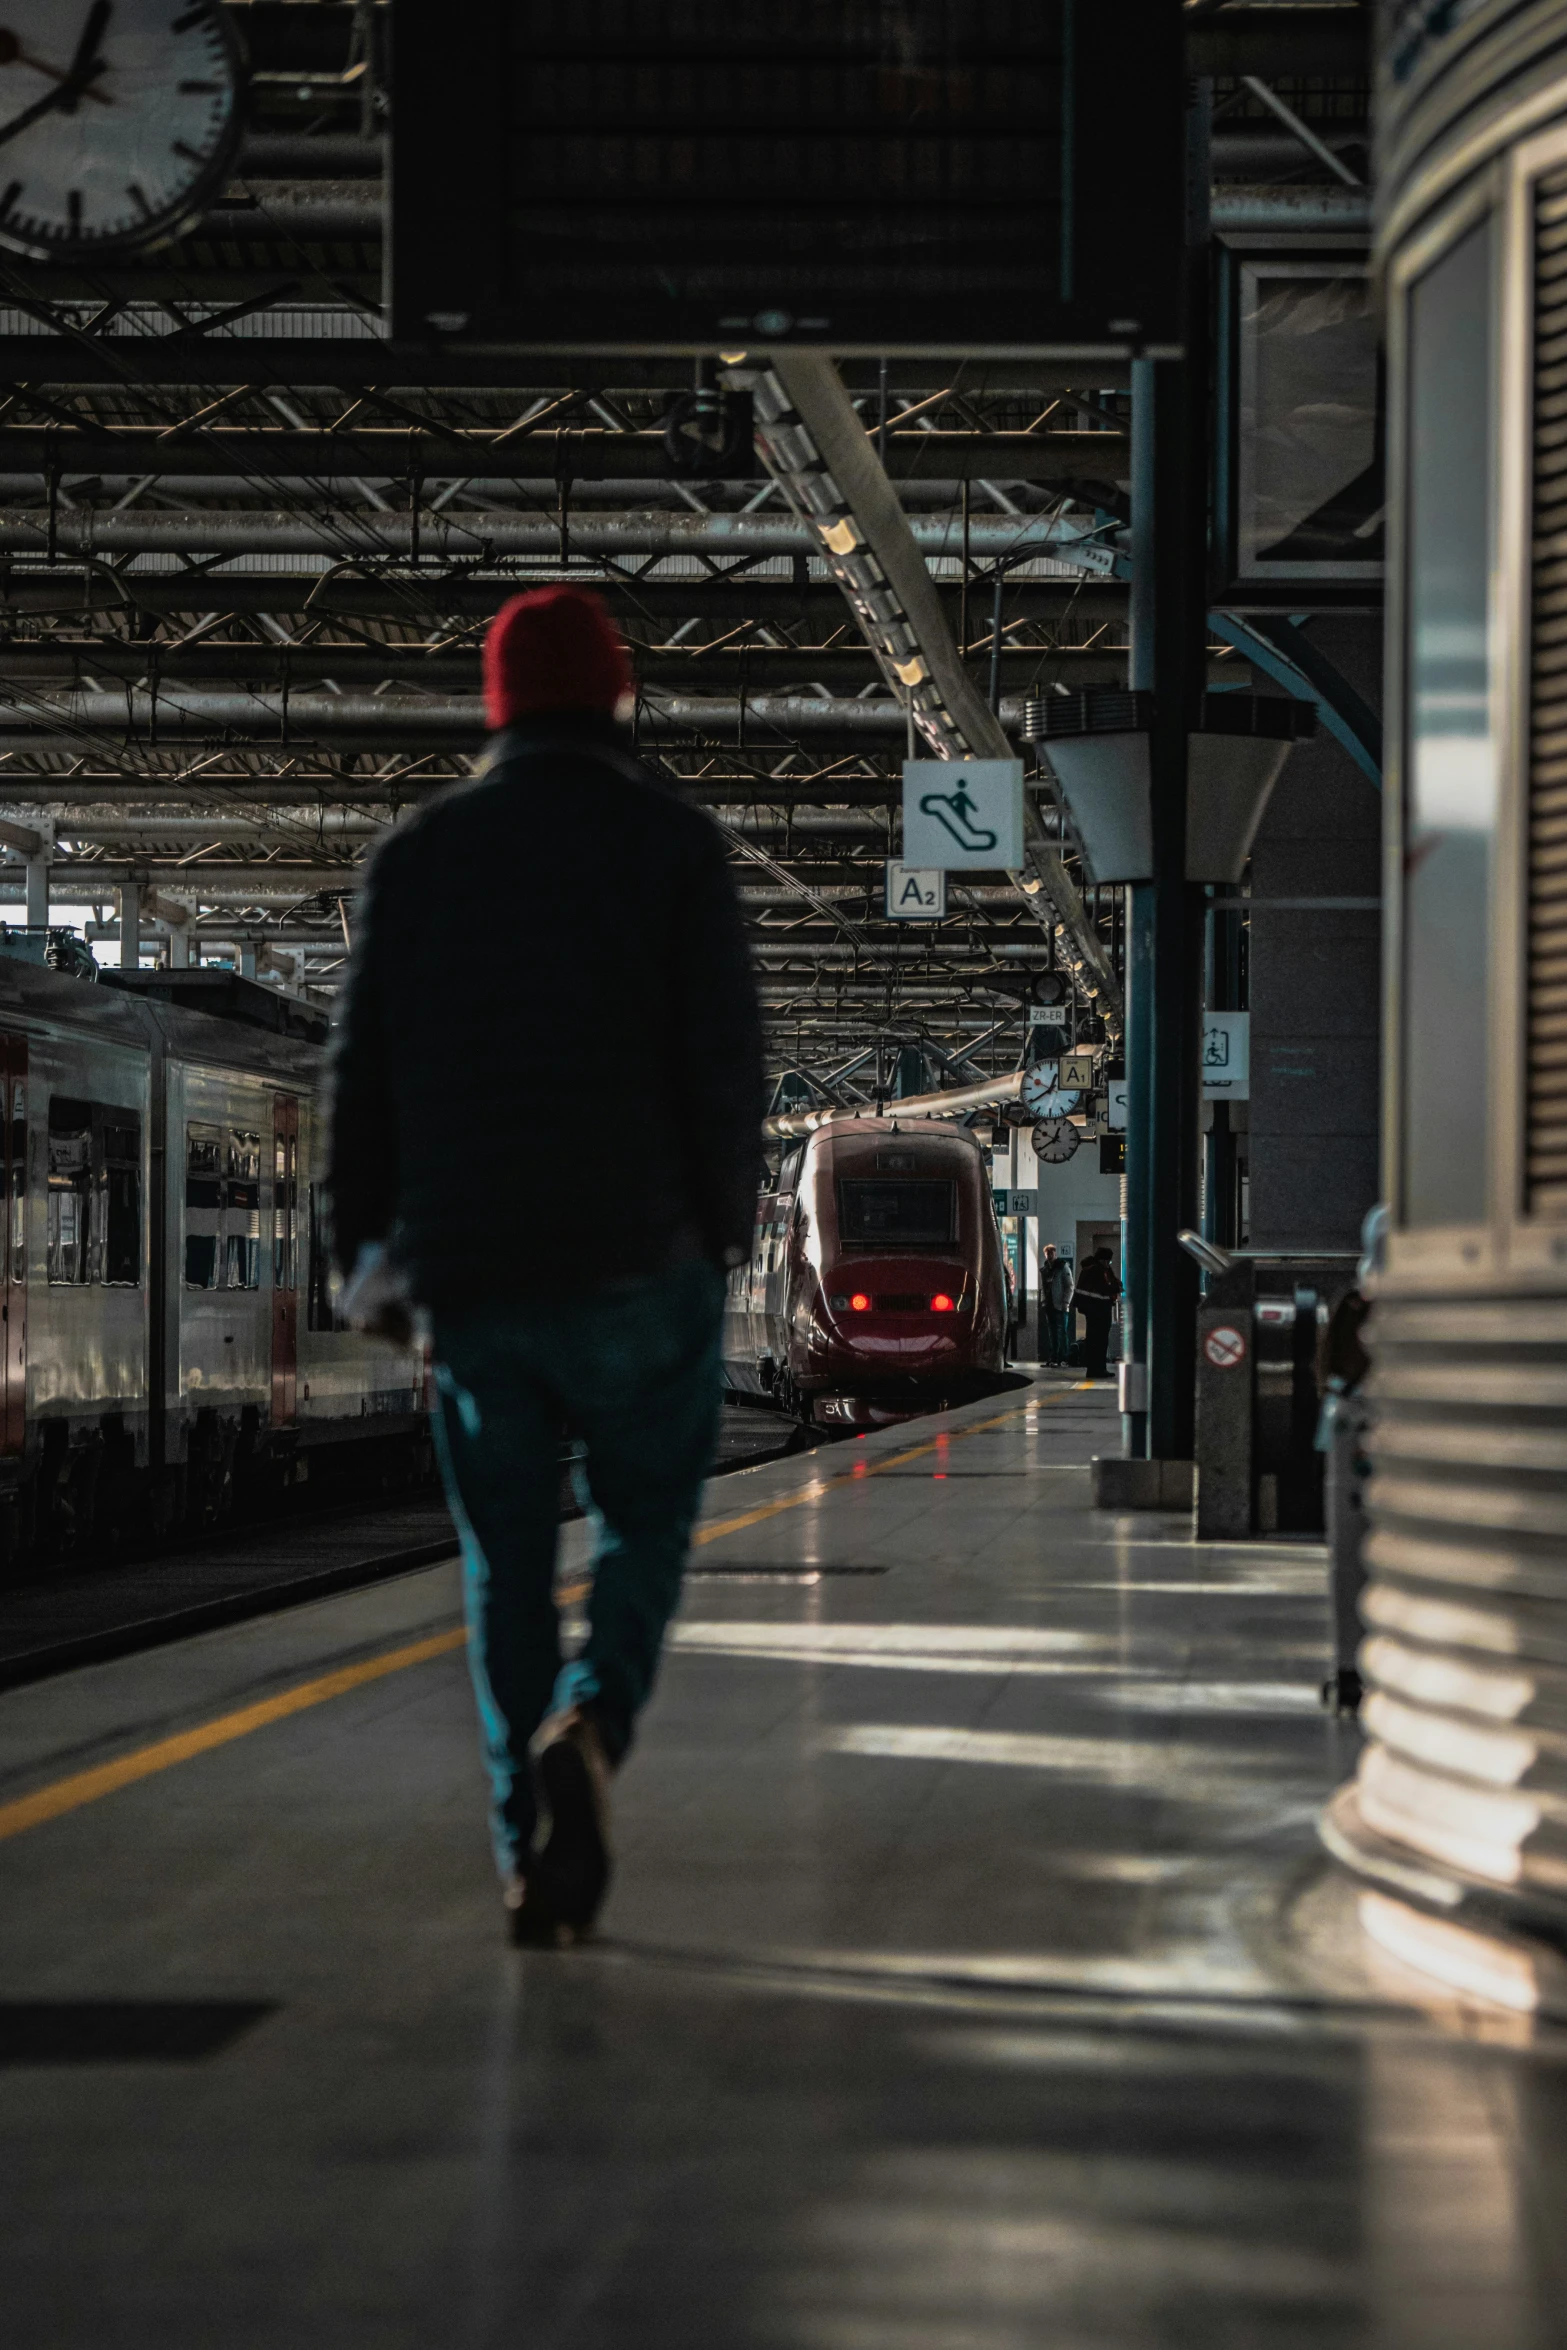 a lone person walking towards a train parked in a train station